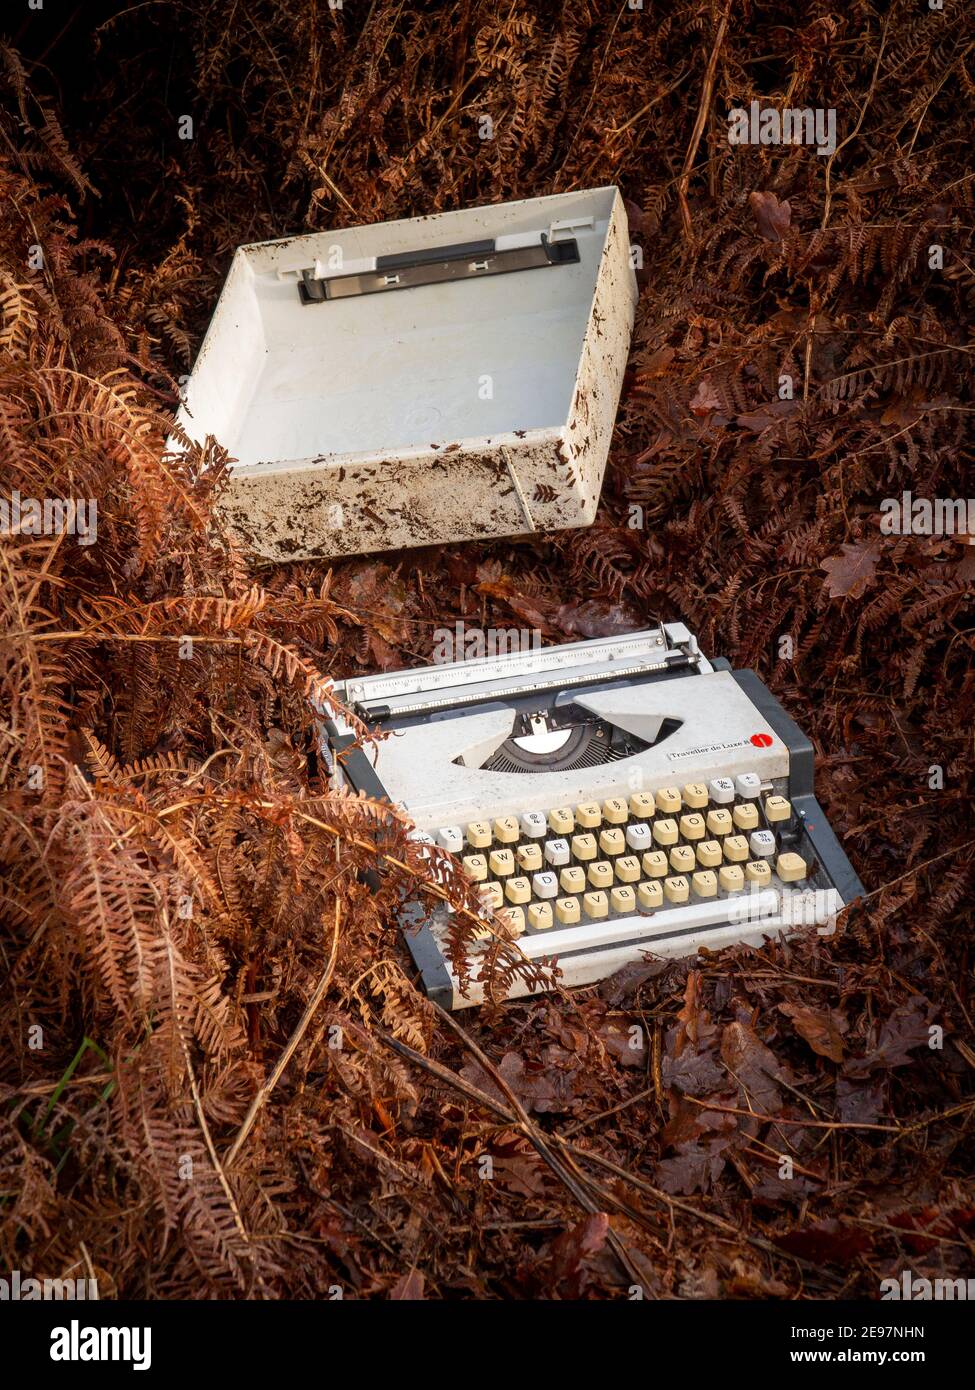 An unwanted portable typewriter dumped in a tangle of autumn bracken Stock Photo